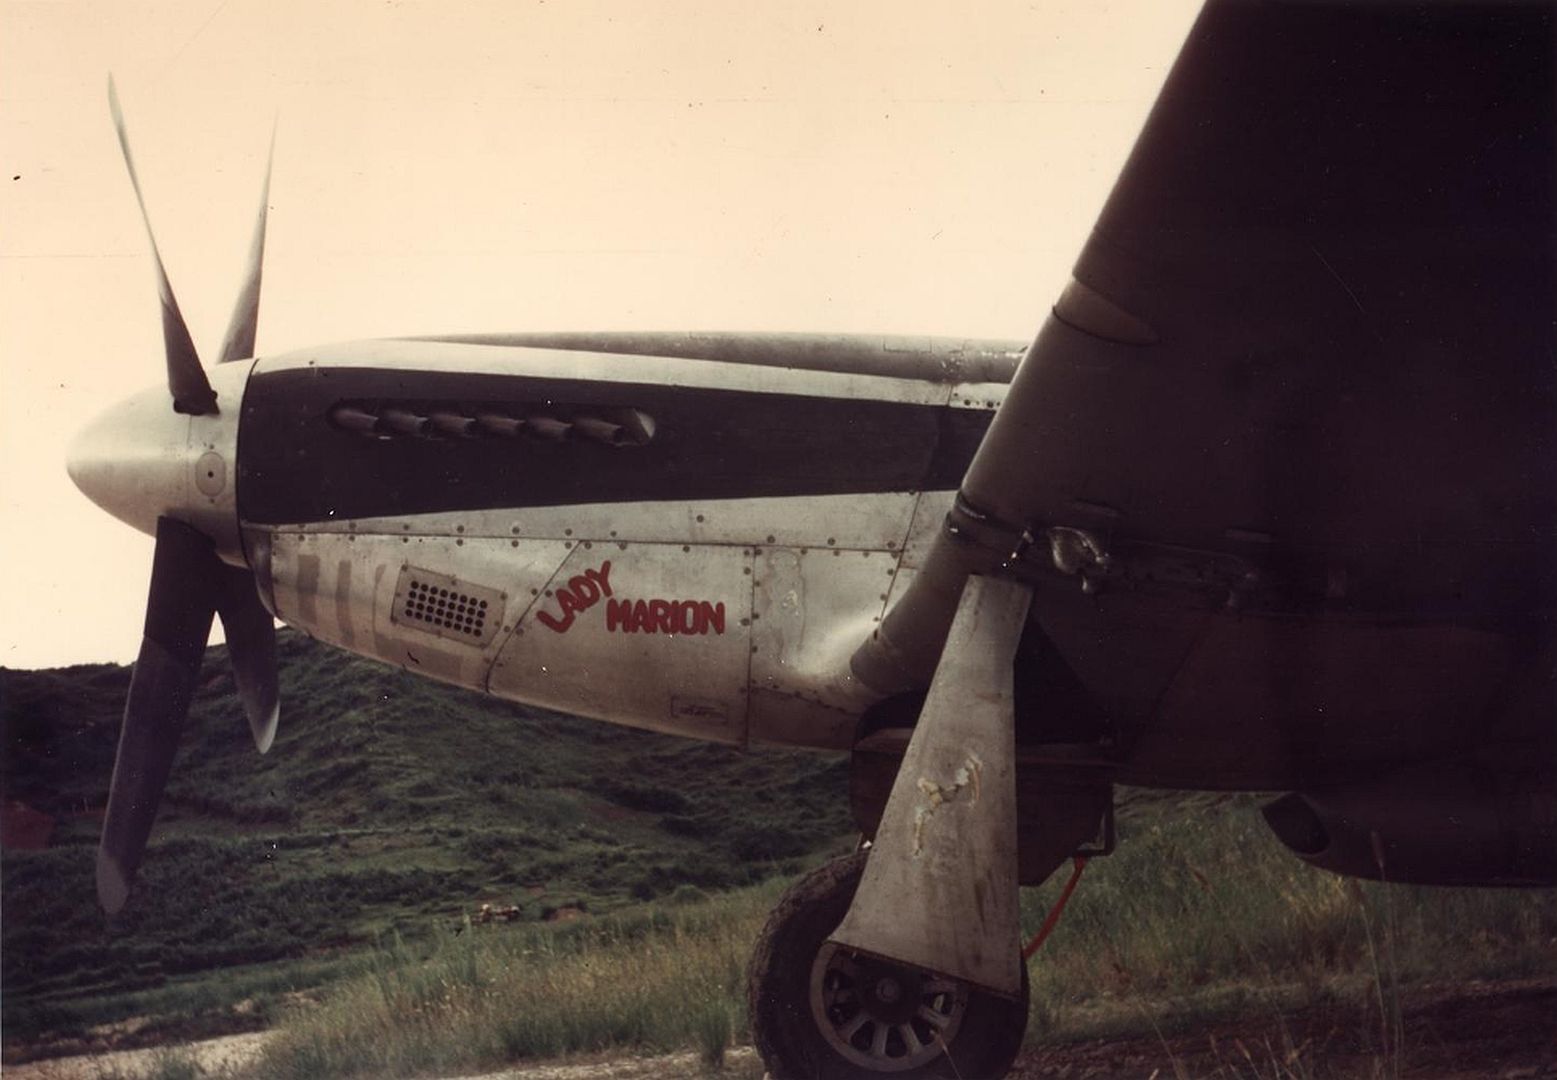  Poats North American P 51D Lady Marion On The Ground At Suichwan China Circa Early 1945